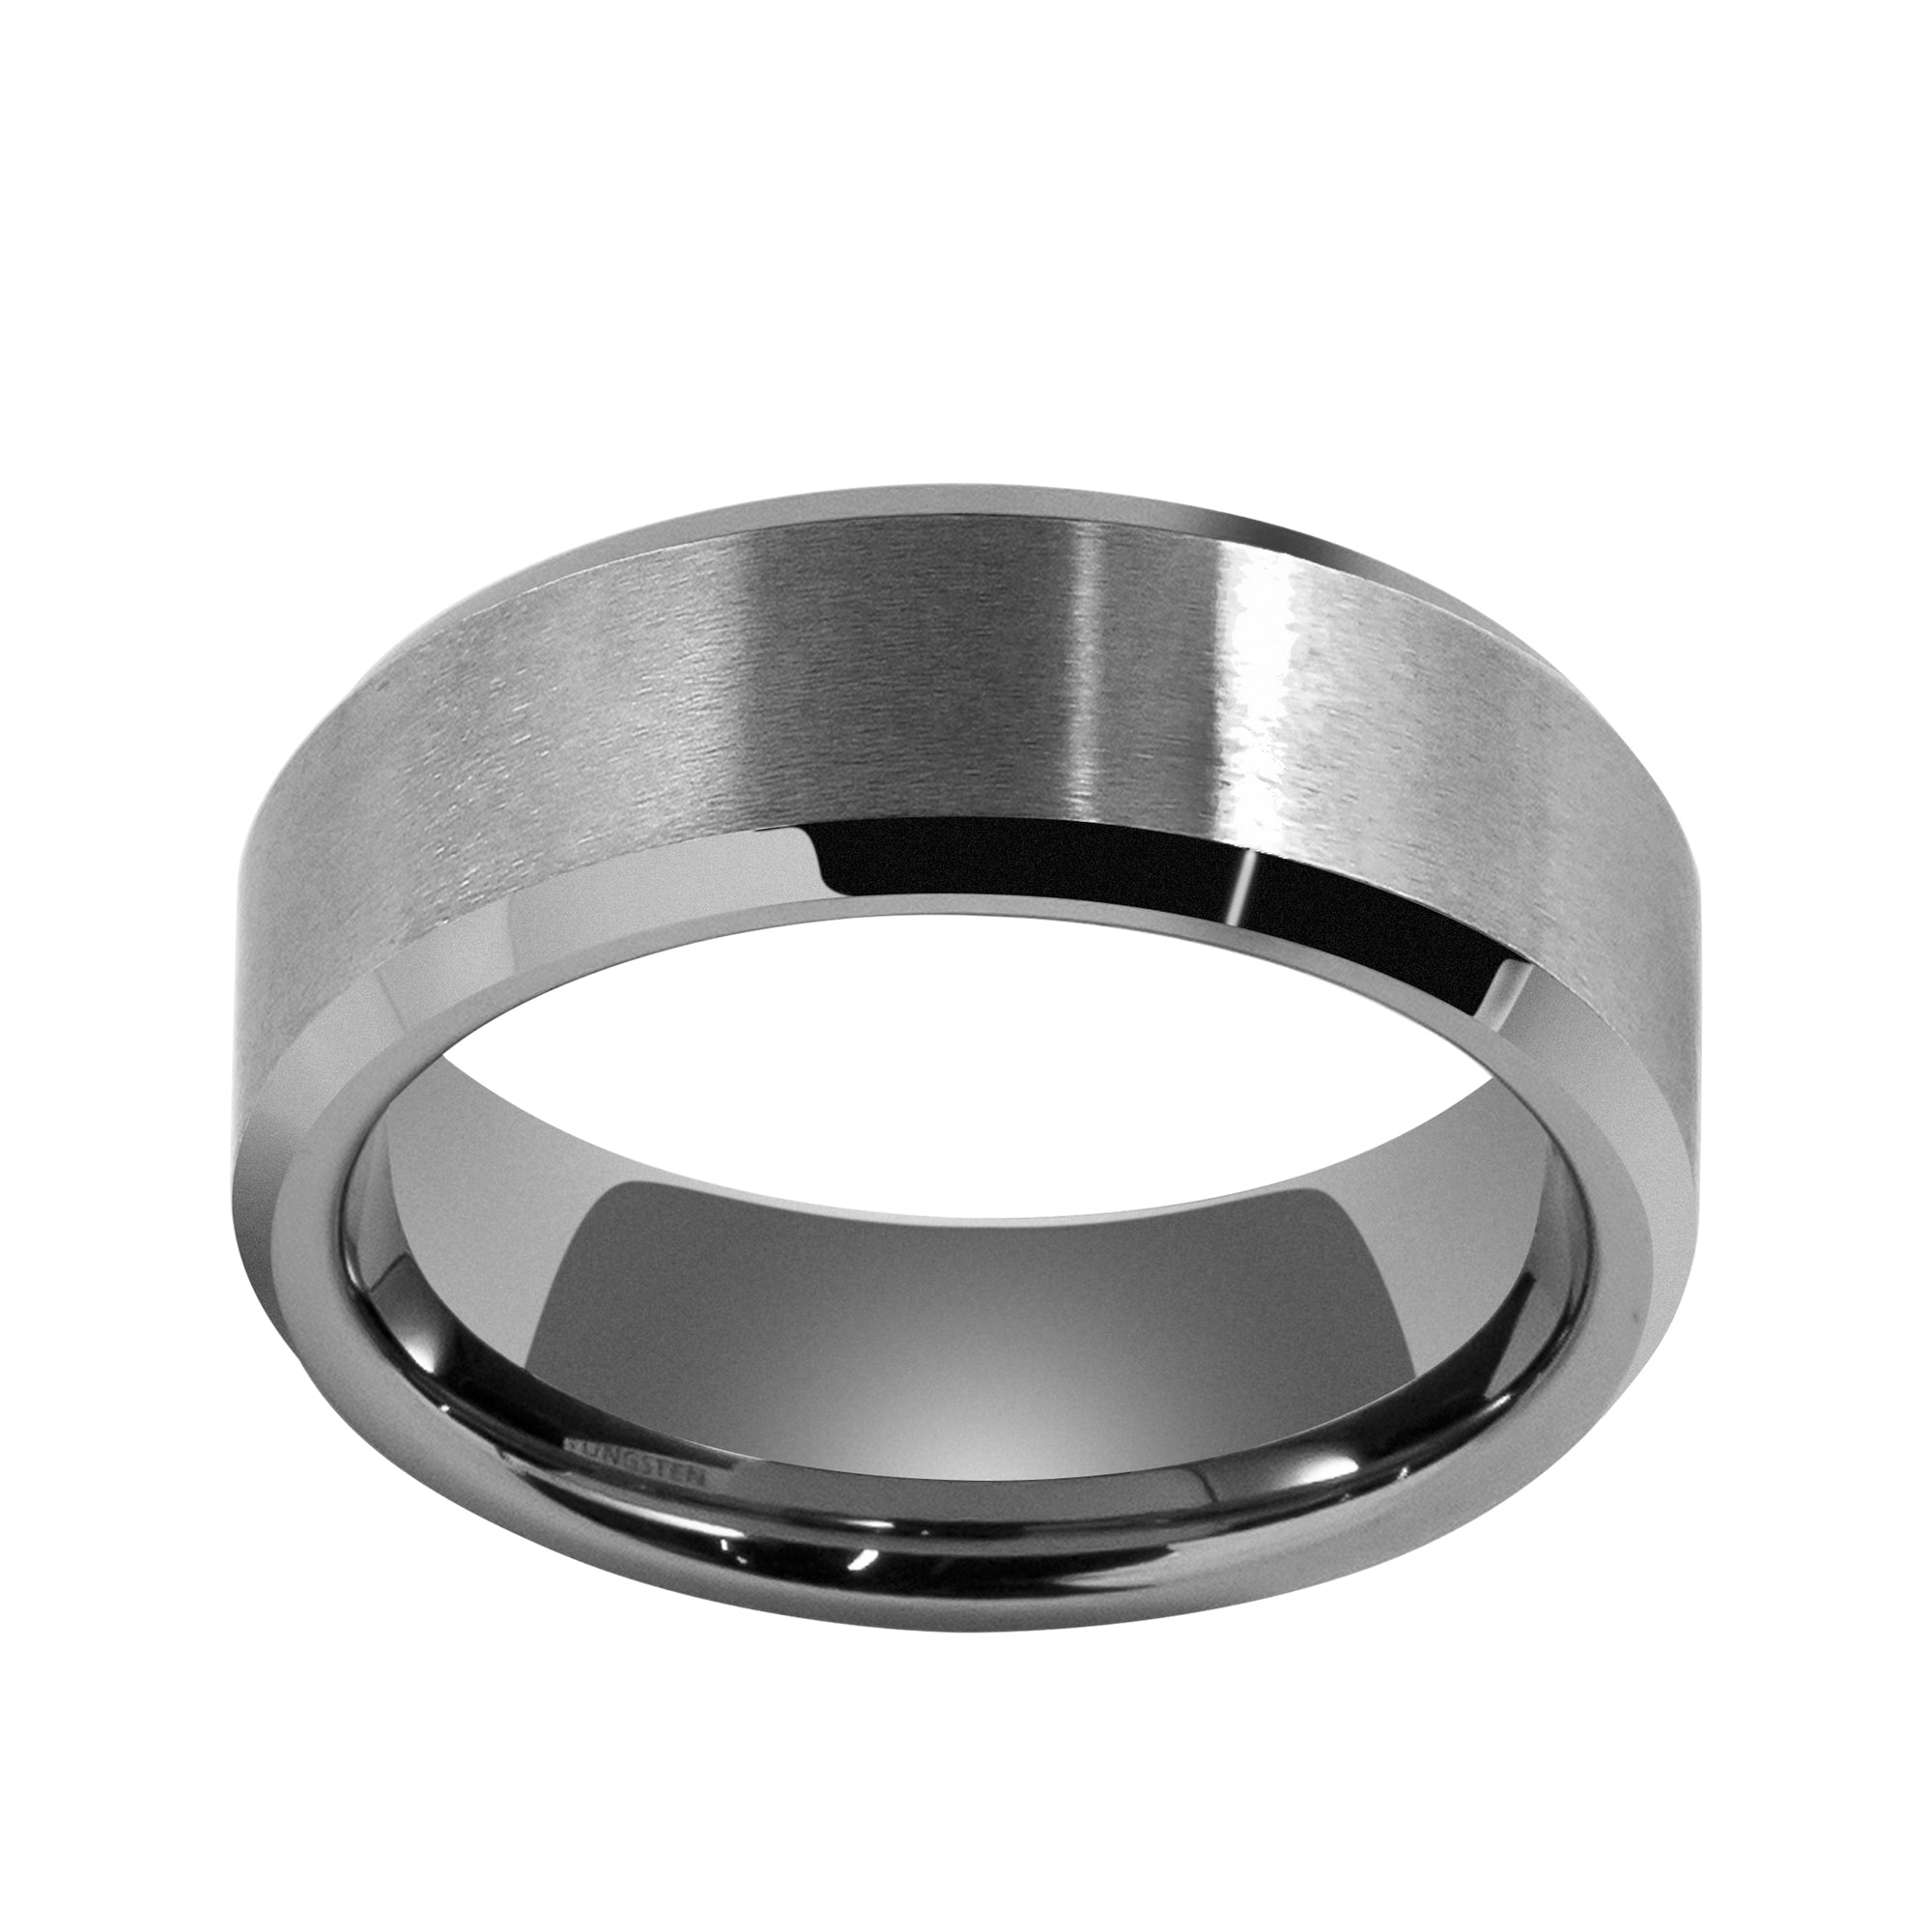 Satin Finished Metallic Tungsten Carbide Ring with Polished Beveled Edge, 6MM